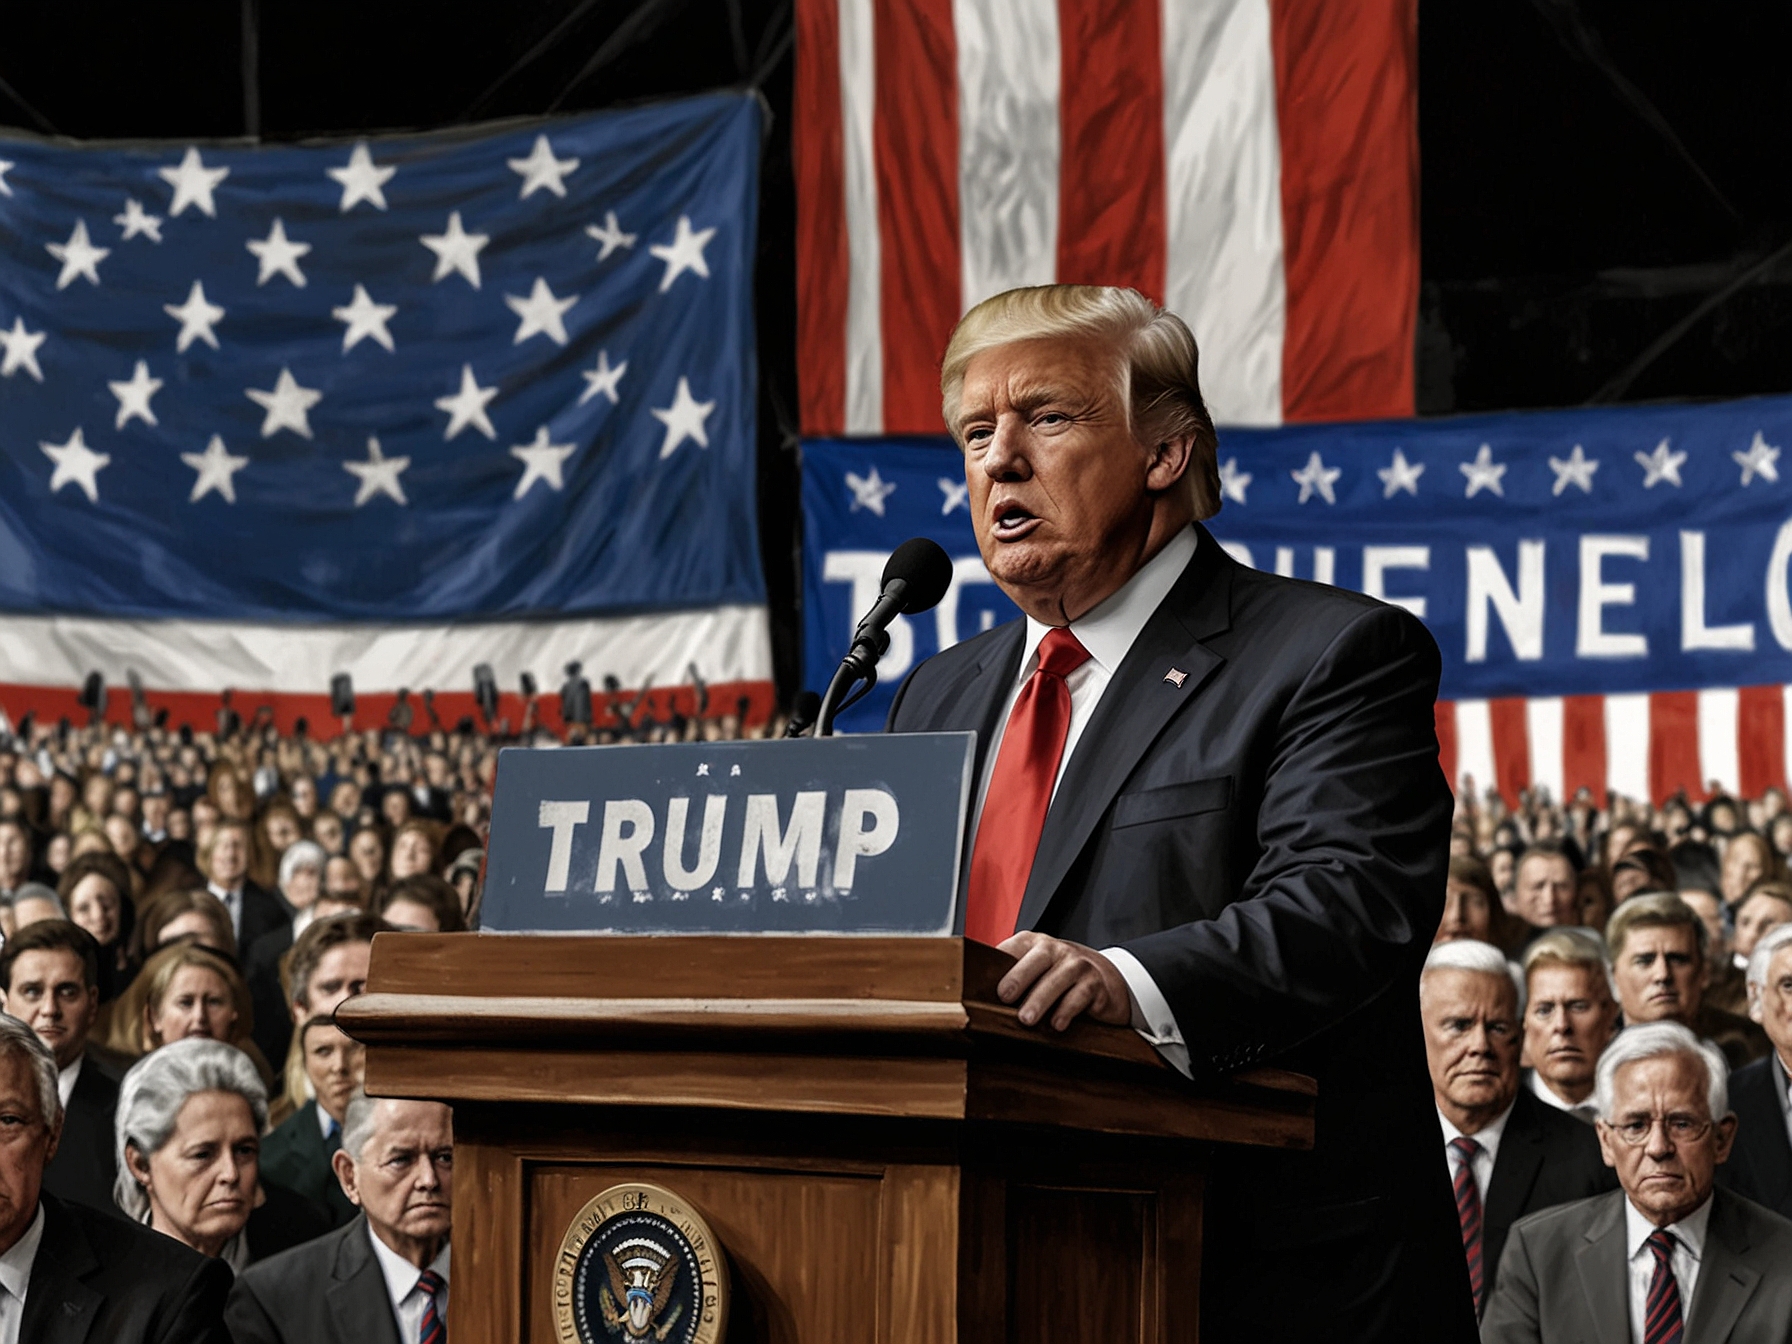 Former President Donald Trump speaks at a political rally.